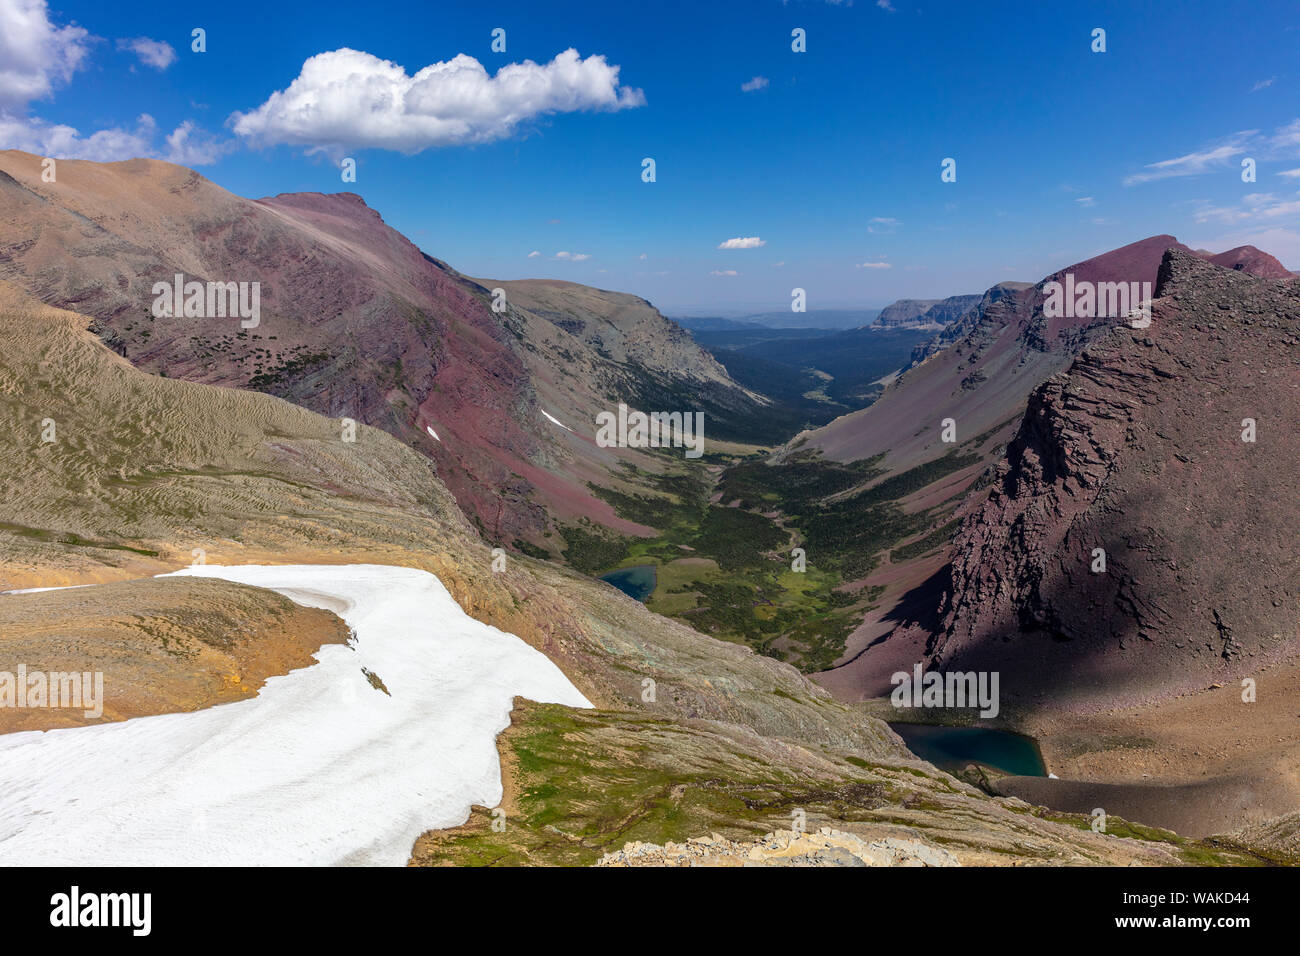 Looking down at the remote Boulder Creek Valley from Siyeh Pass in Glacier National Park, Montana, USA Stock Photo